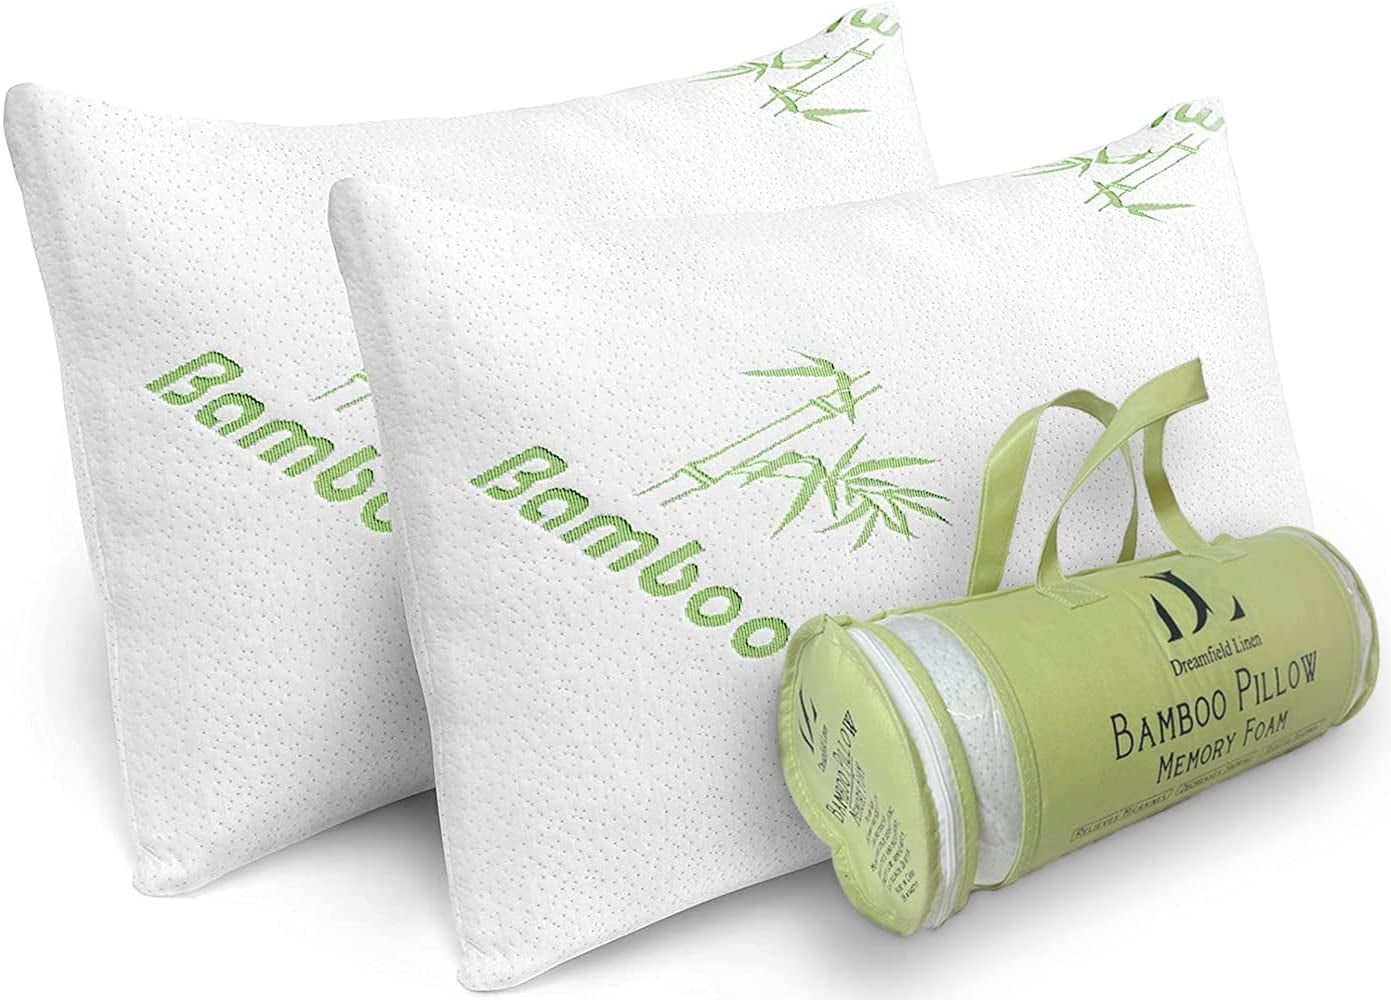 Bamboo Pillow Memory Foam Stay Cool Removable Cover With Zipper Hotel Quality 